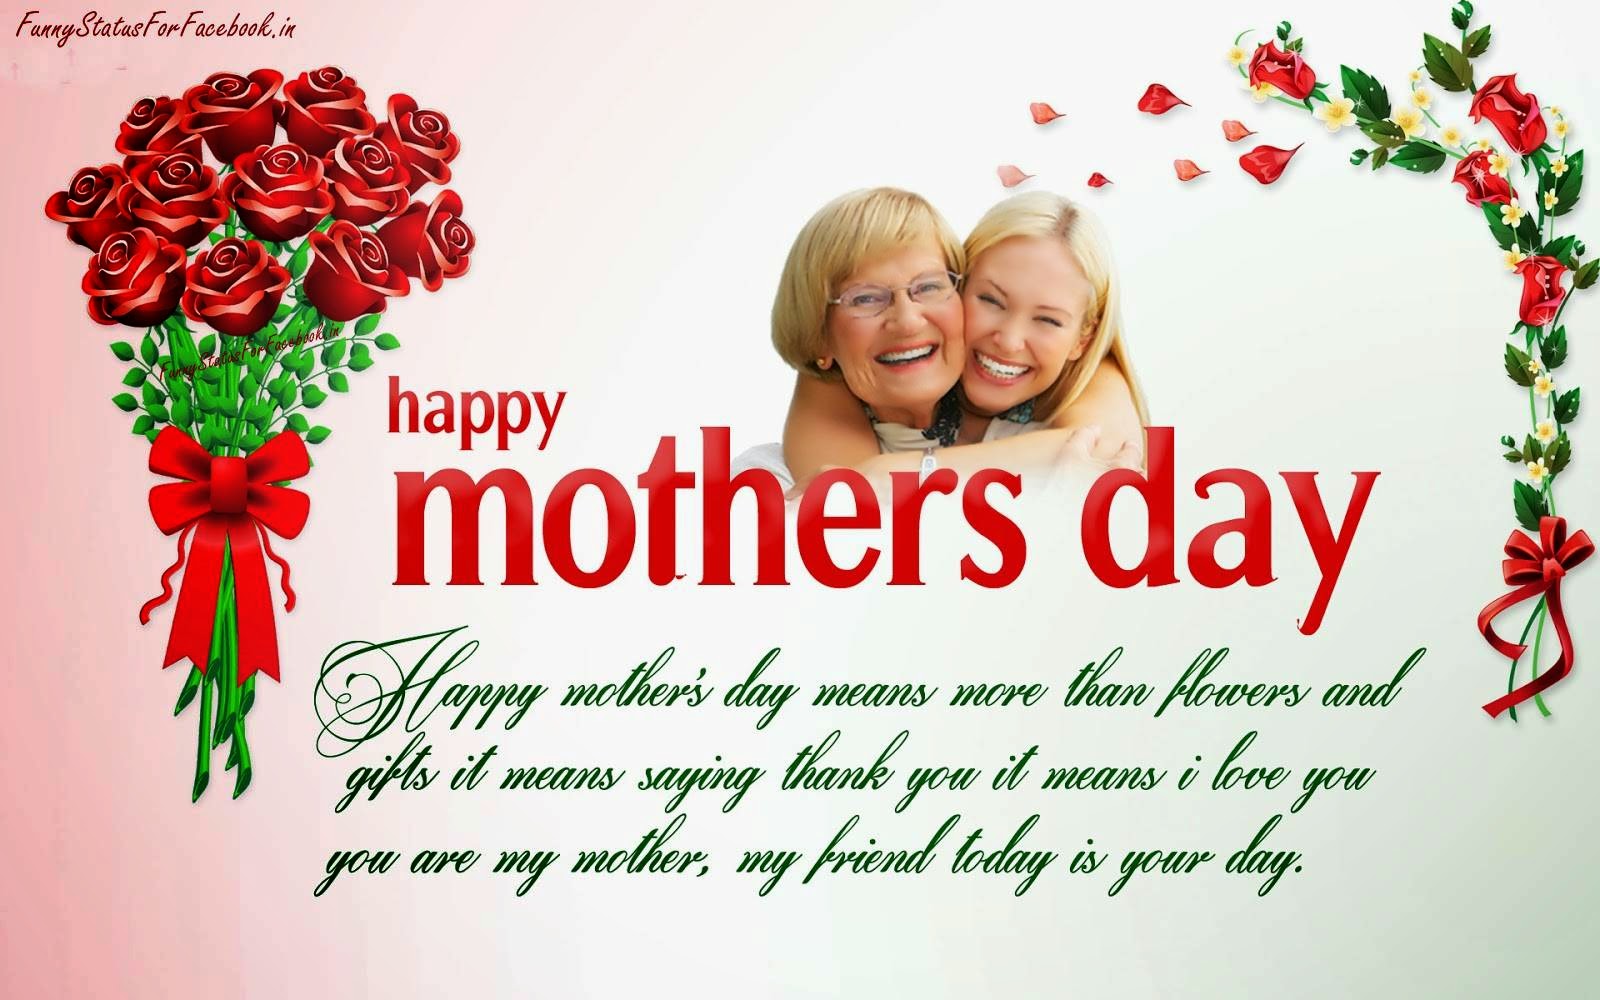 Happy Mothers Day Quotes Greeting Cards Wallpapers with Messages | Best